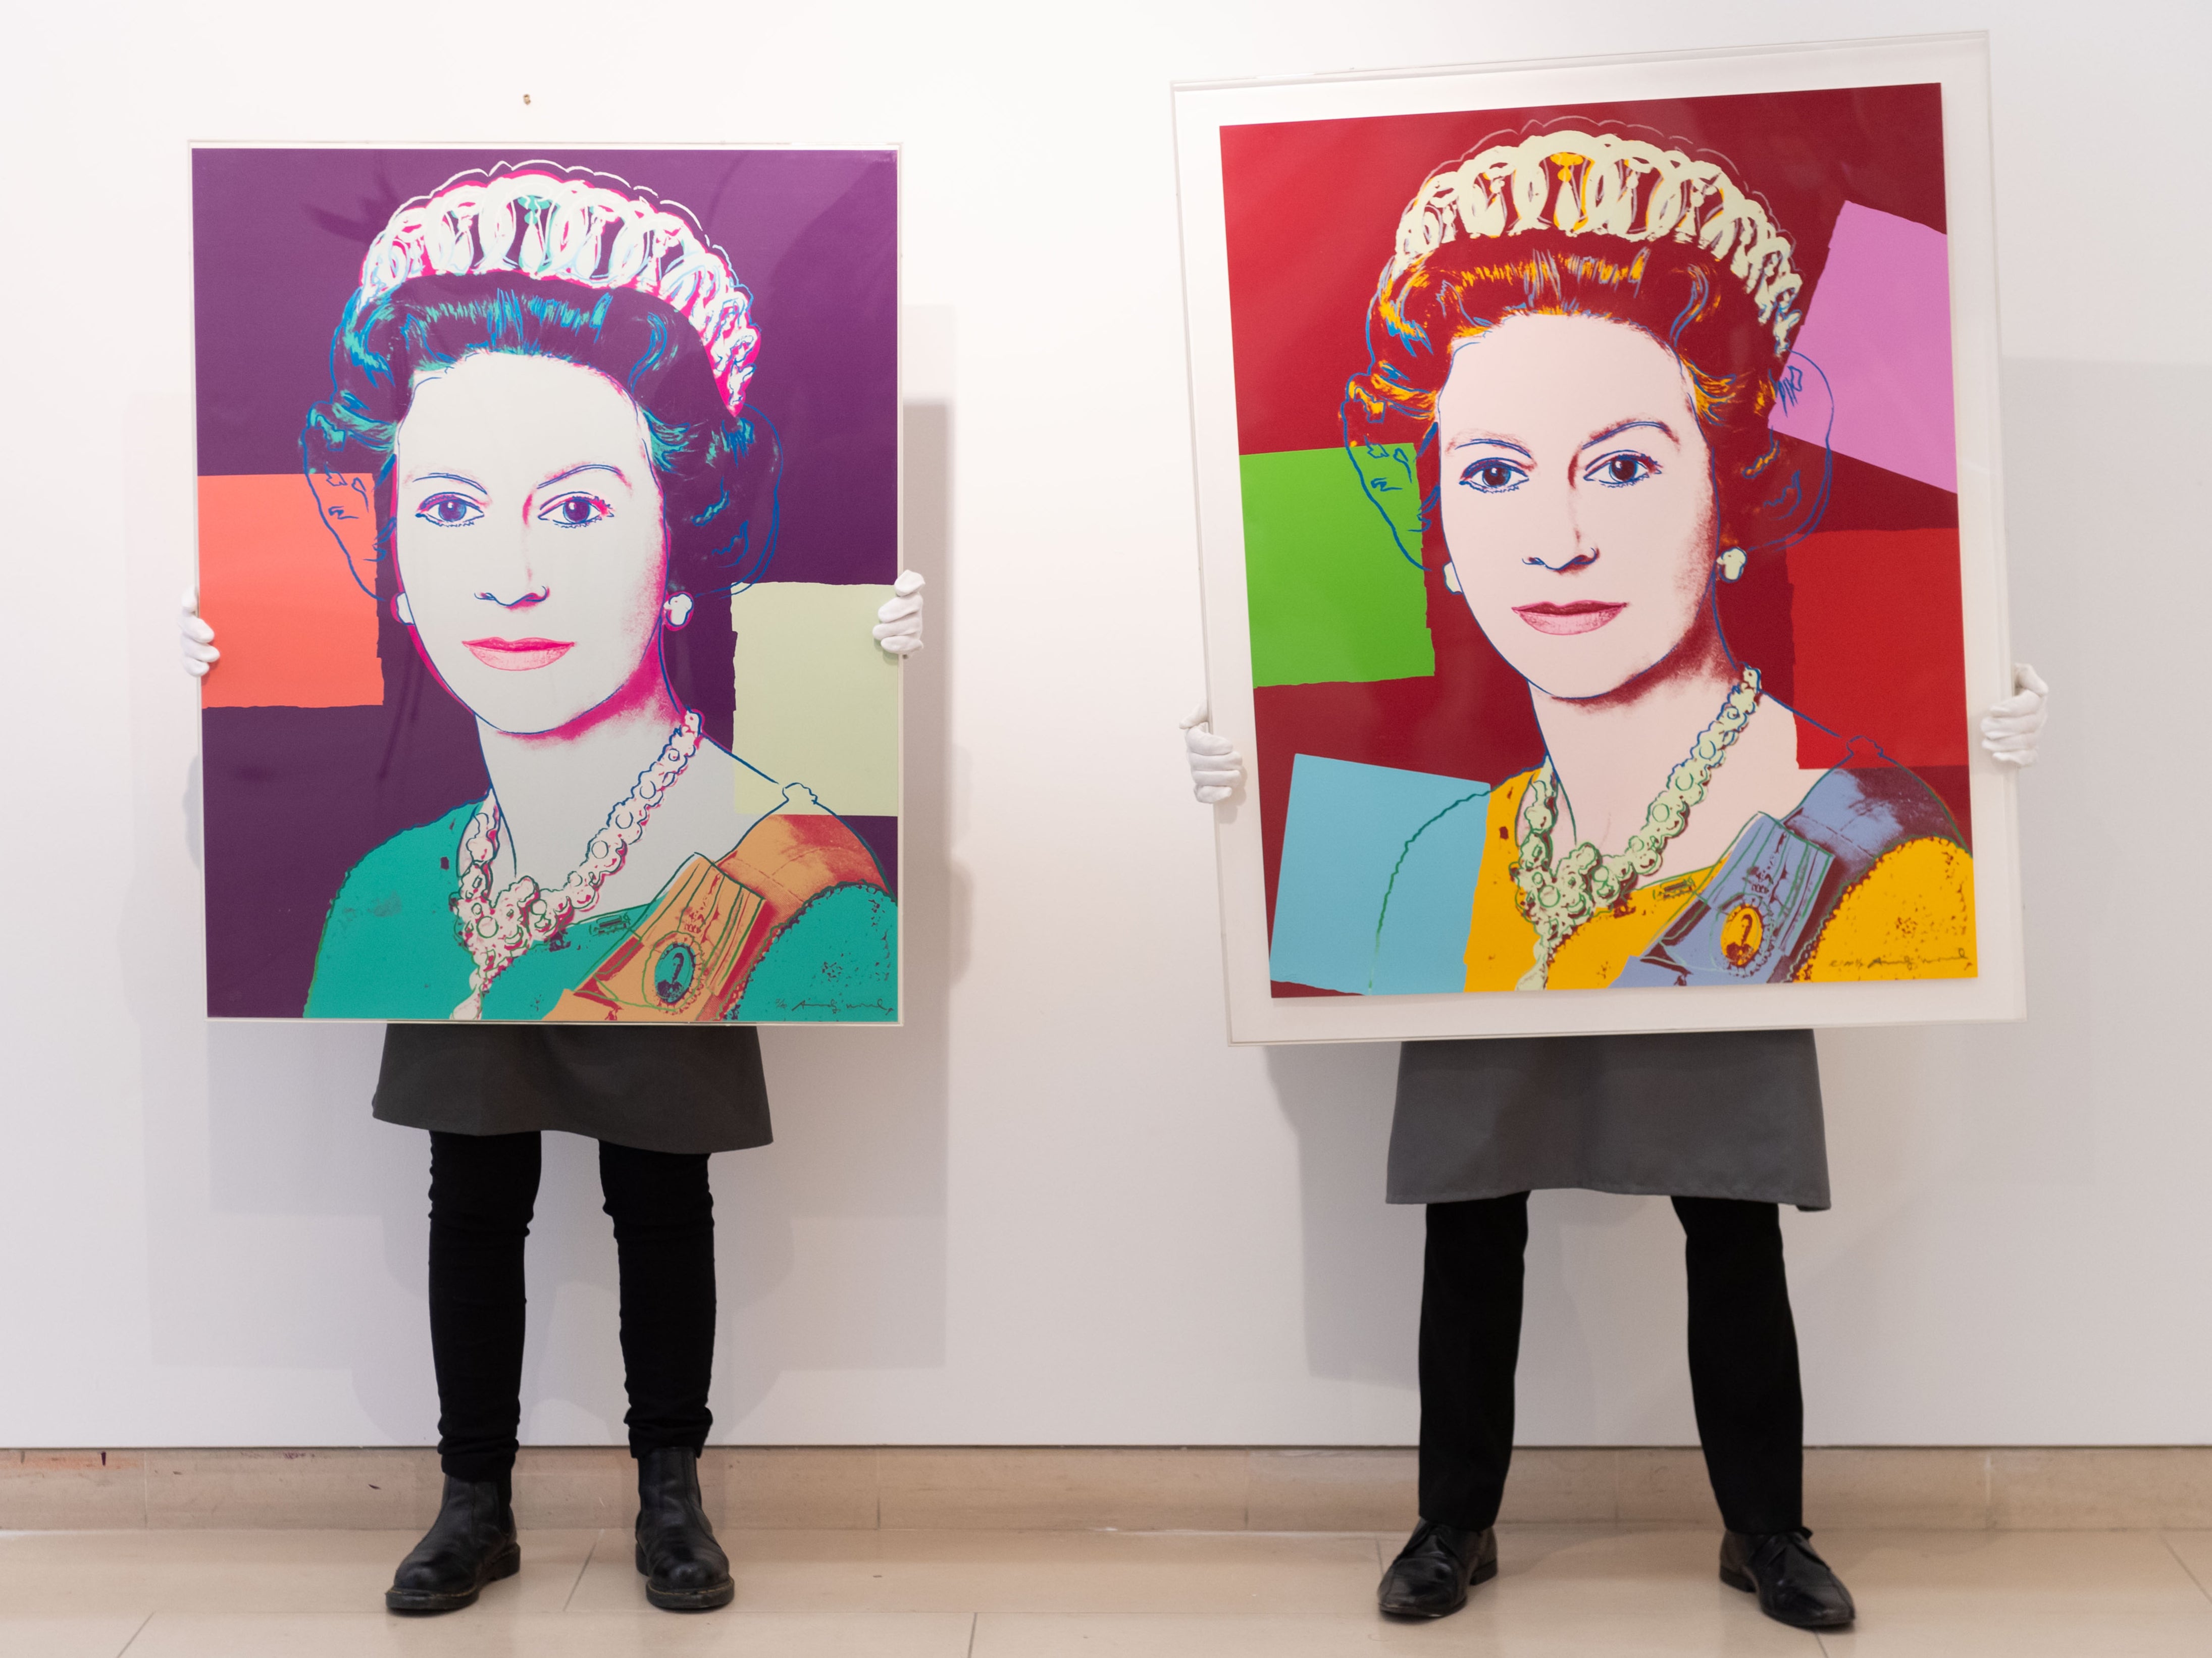 Reigning Queens by Andy Warhol is displayed during preparations for online sales at Christie’s Auction House on 26 March 2021